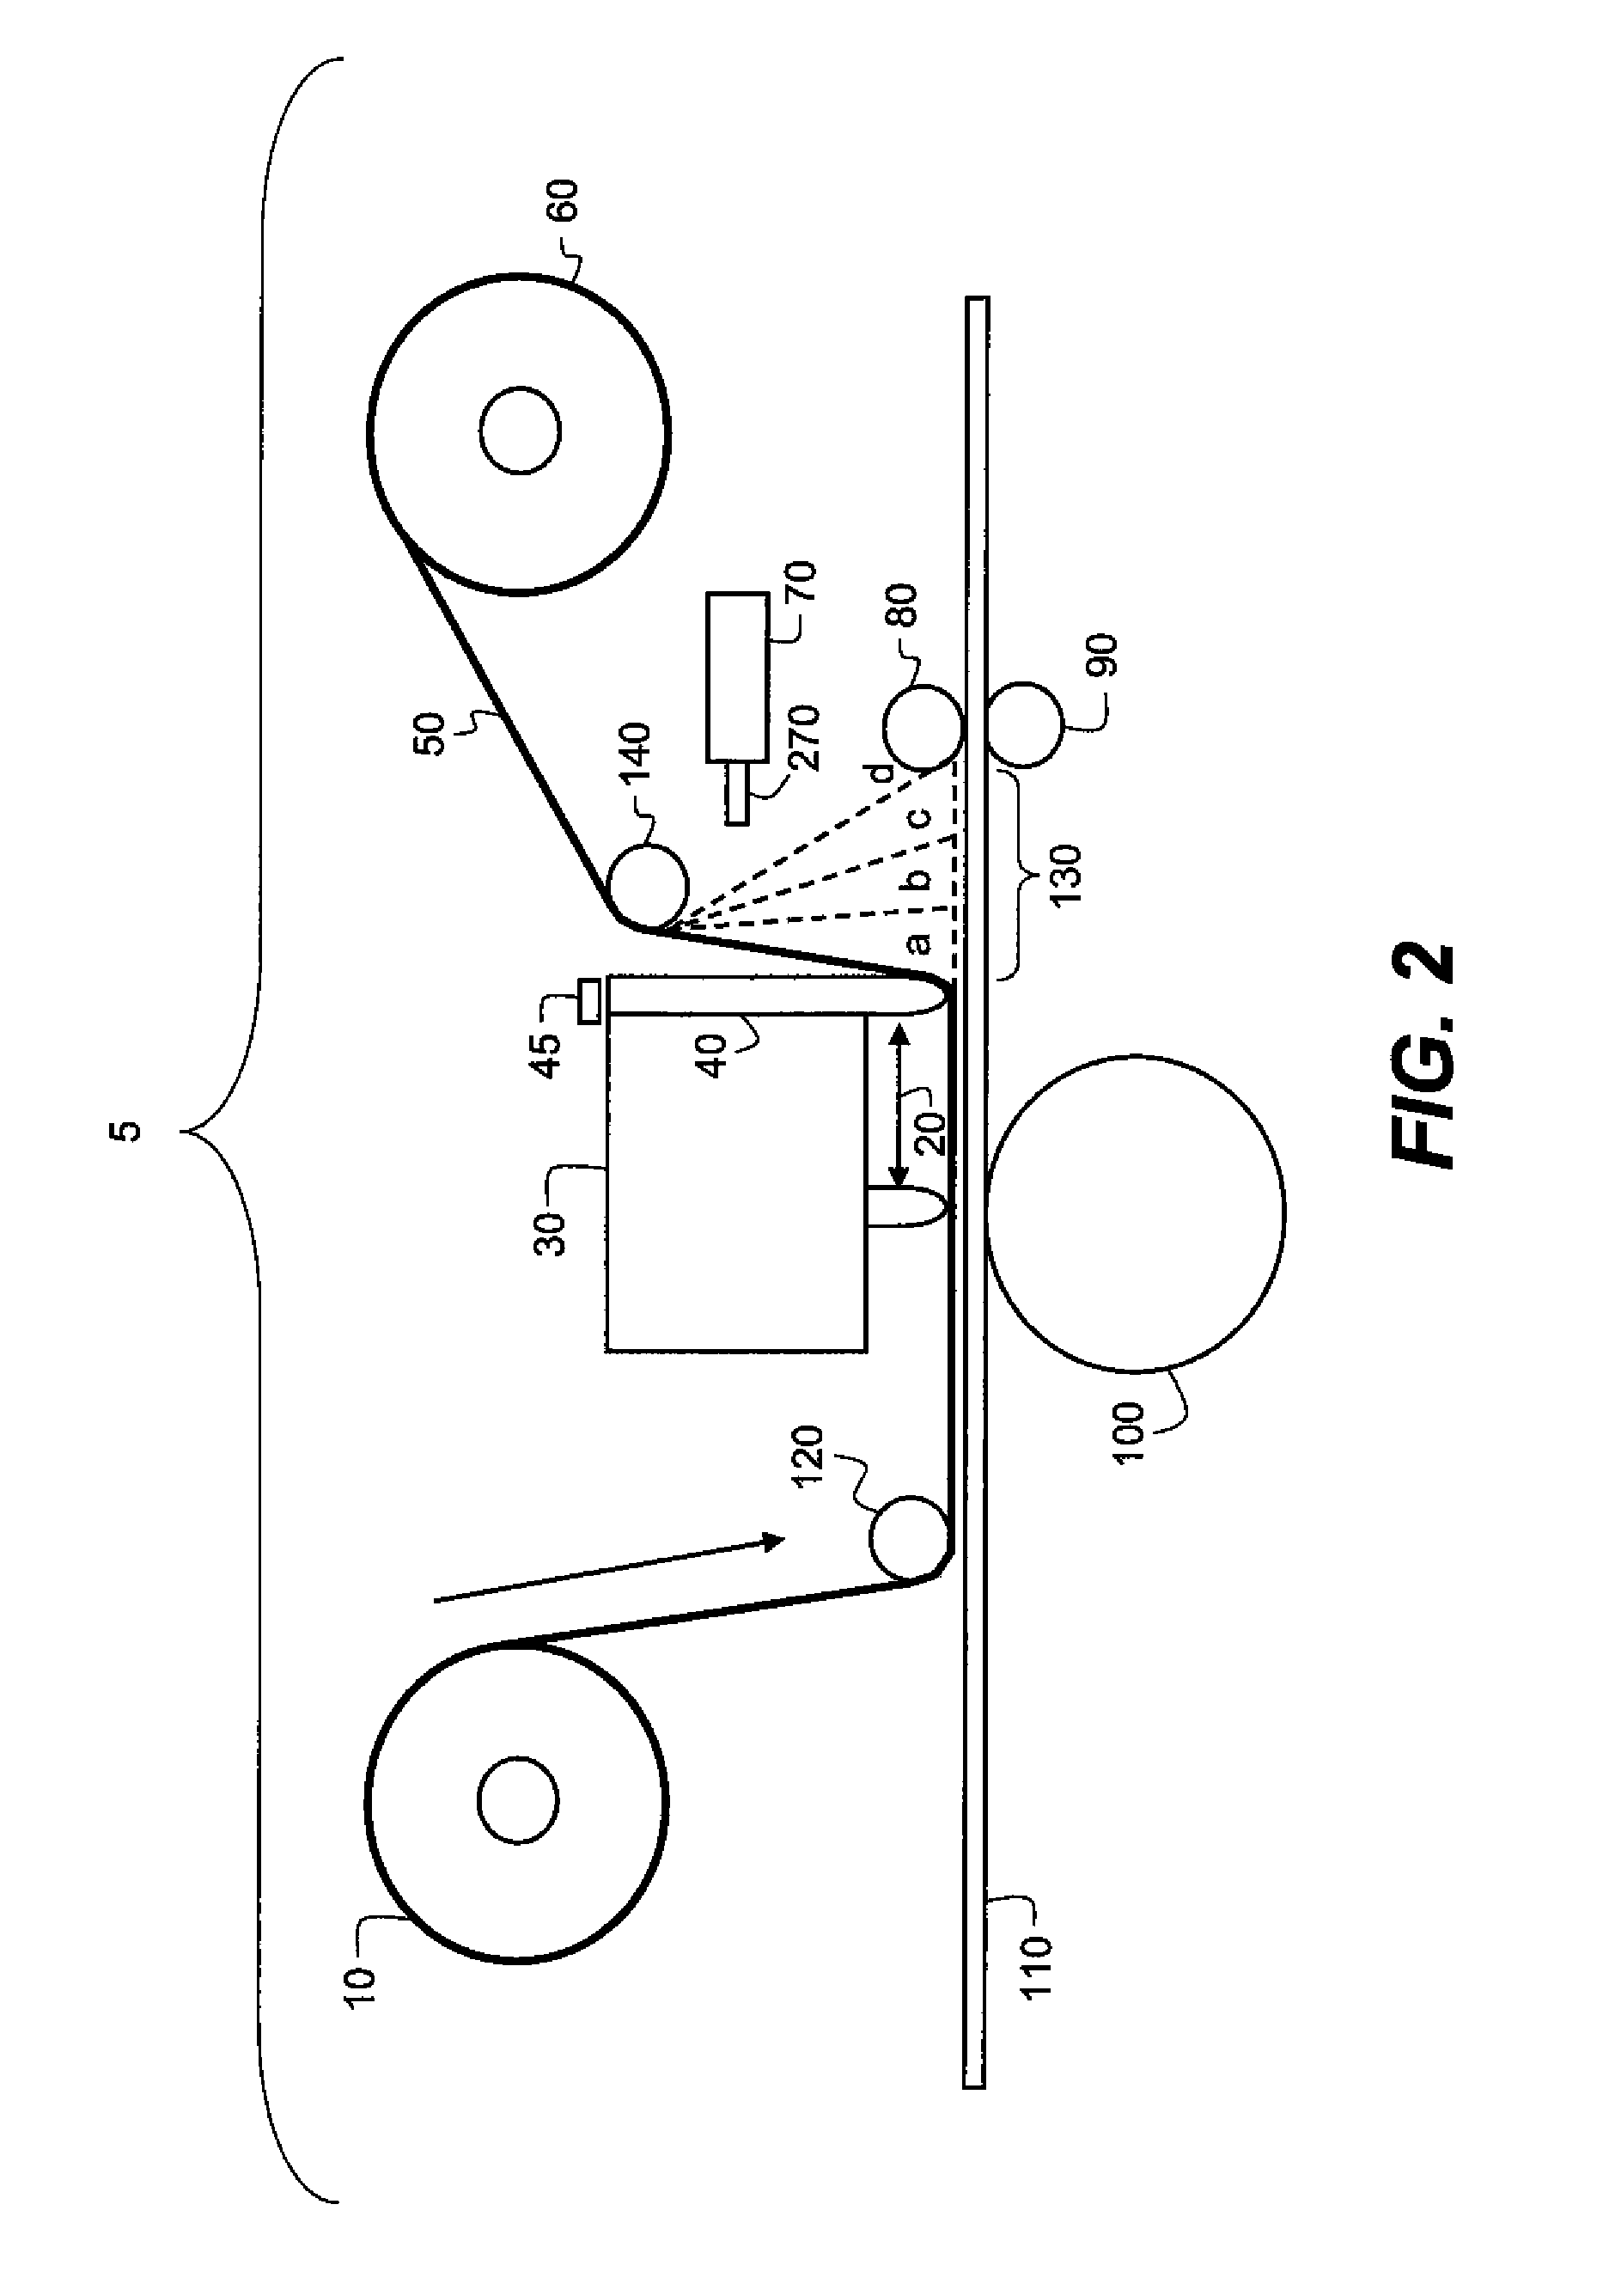 Method for controlling peel position in a printer